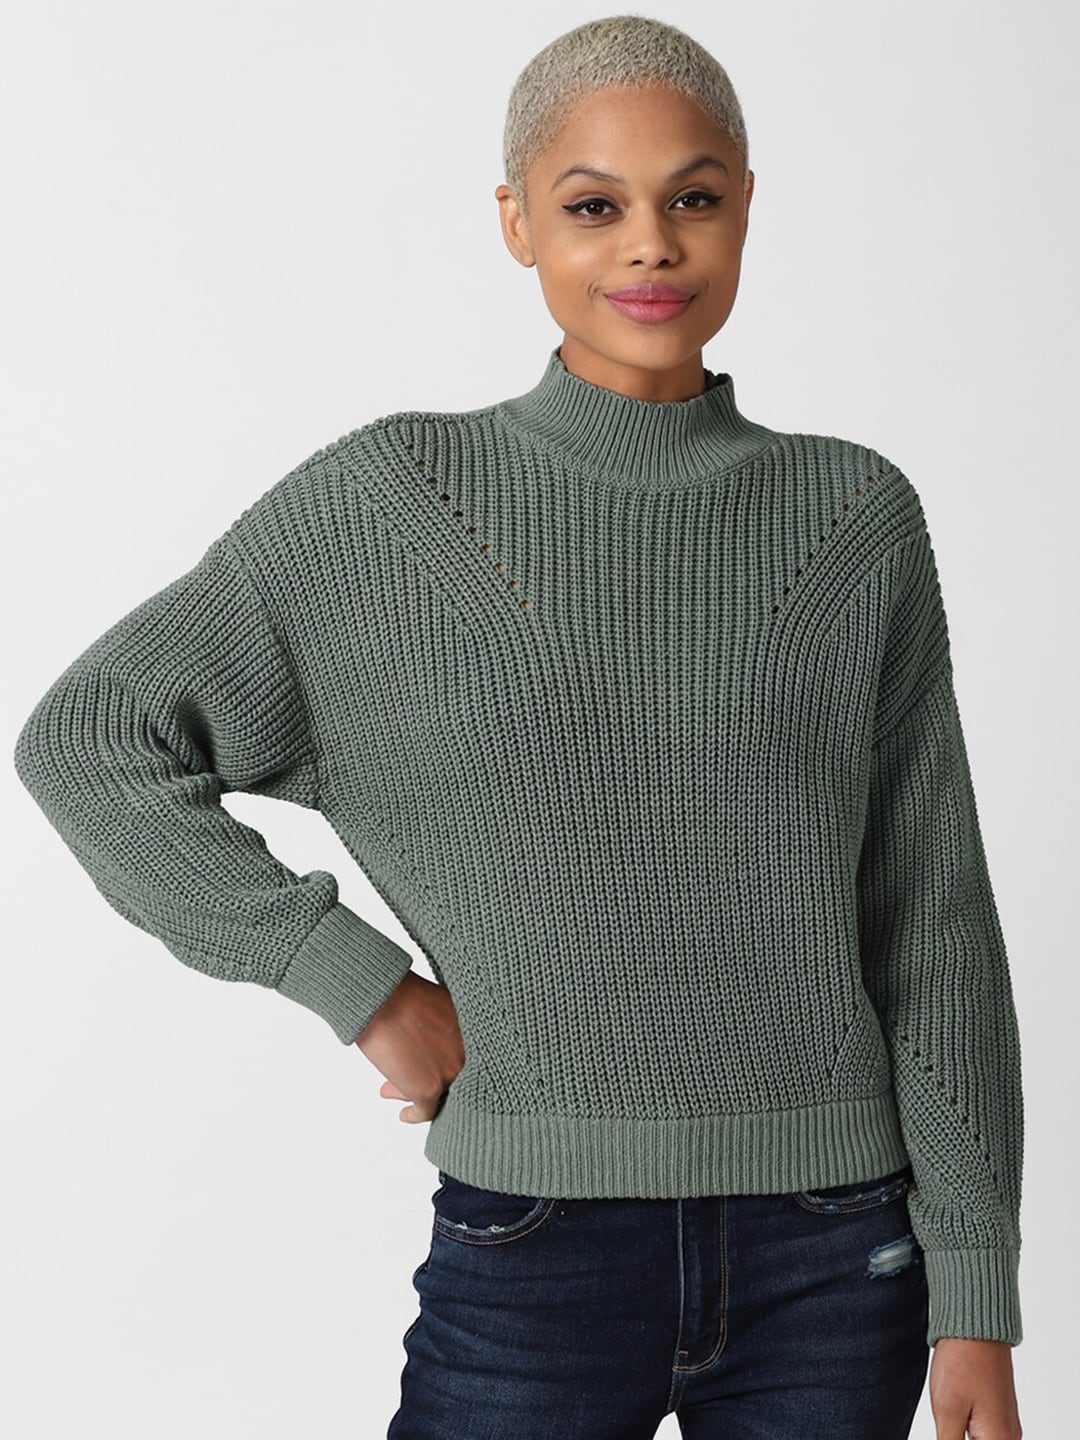 FOREVER 21 Women Olive Green Self Design Open Knitted Pullover Sweater Price in India